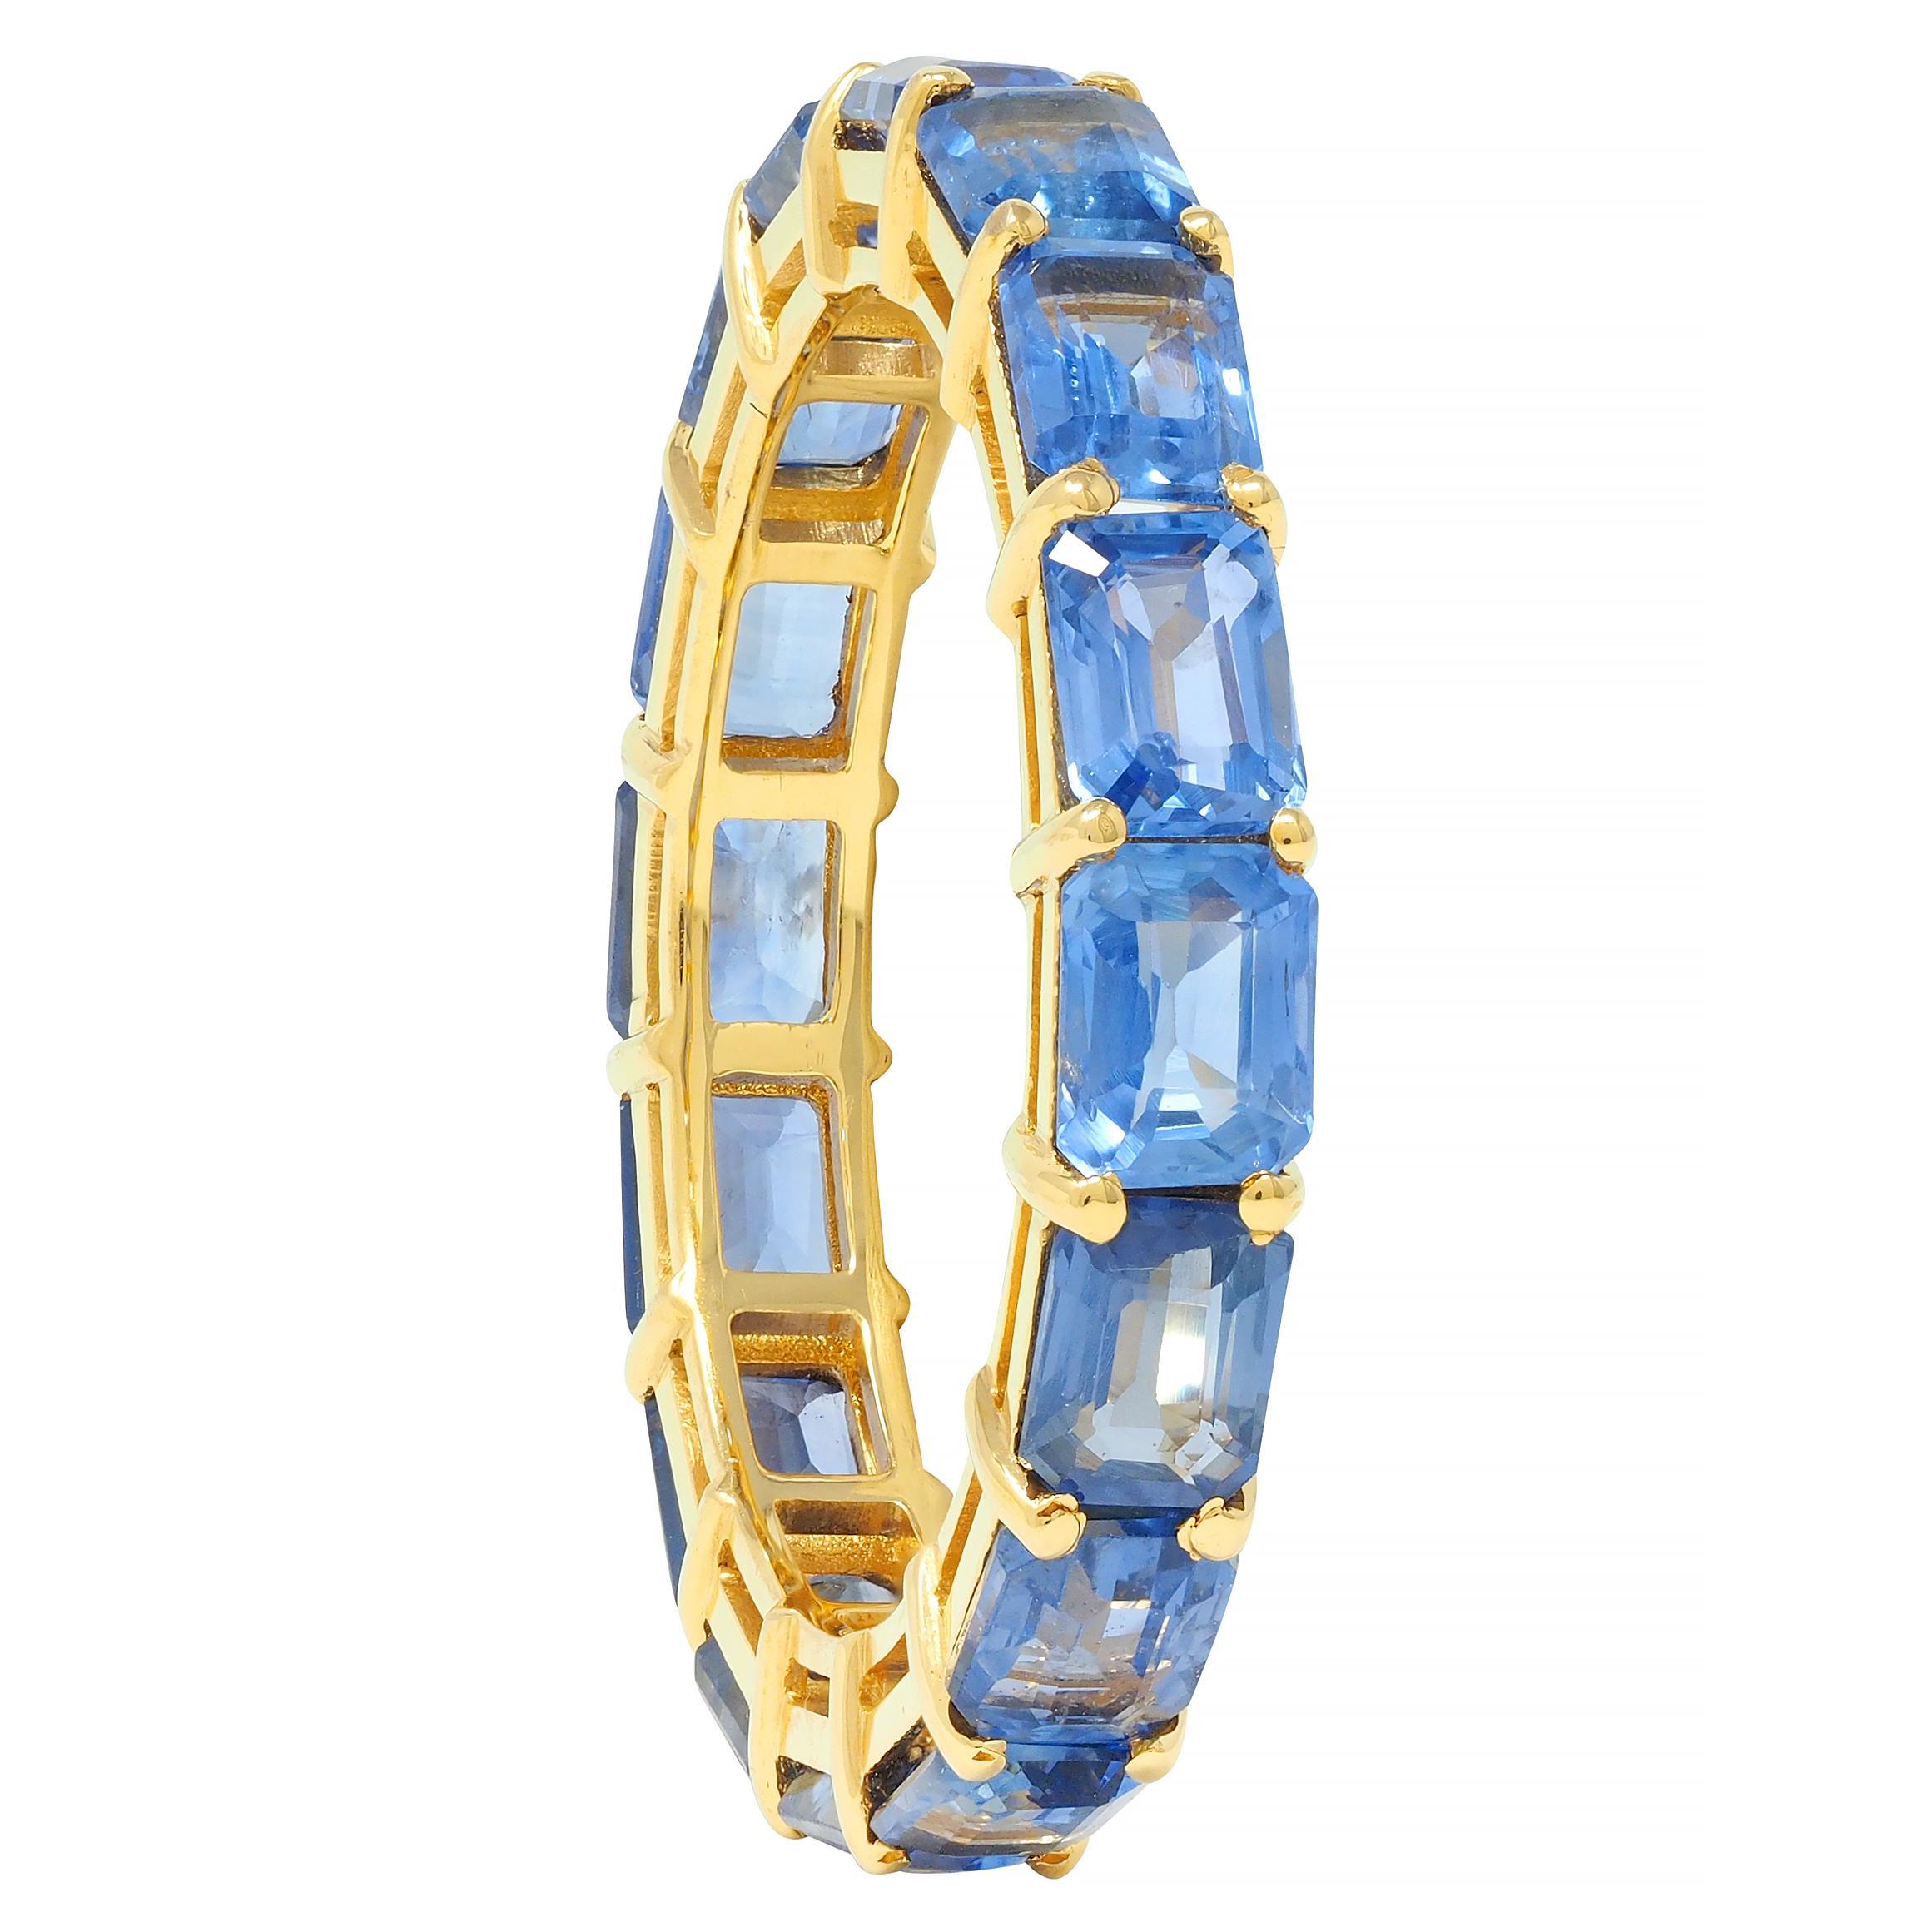 Comprised of emerald cut sapphires prong set East to West in wire baskets fully around
Weighing approximately 4.80 carats total
Transparent light to medium blue in color
Completed by high polished gold finish
Tested as 18 karat gold
Circa;